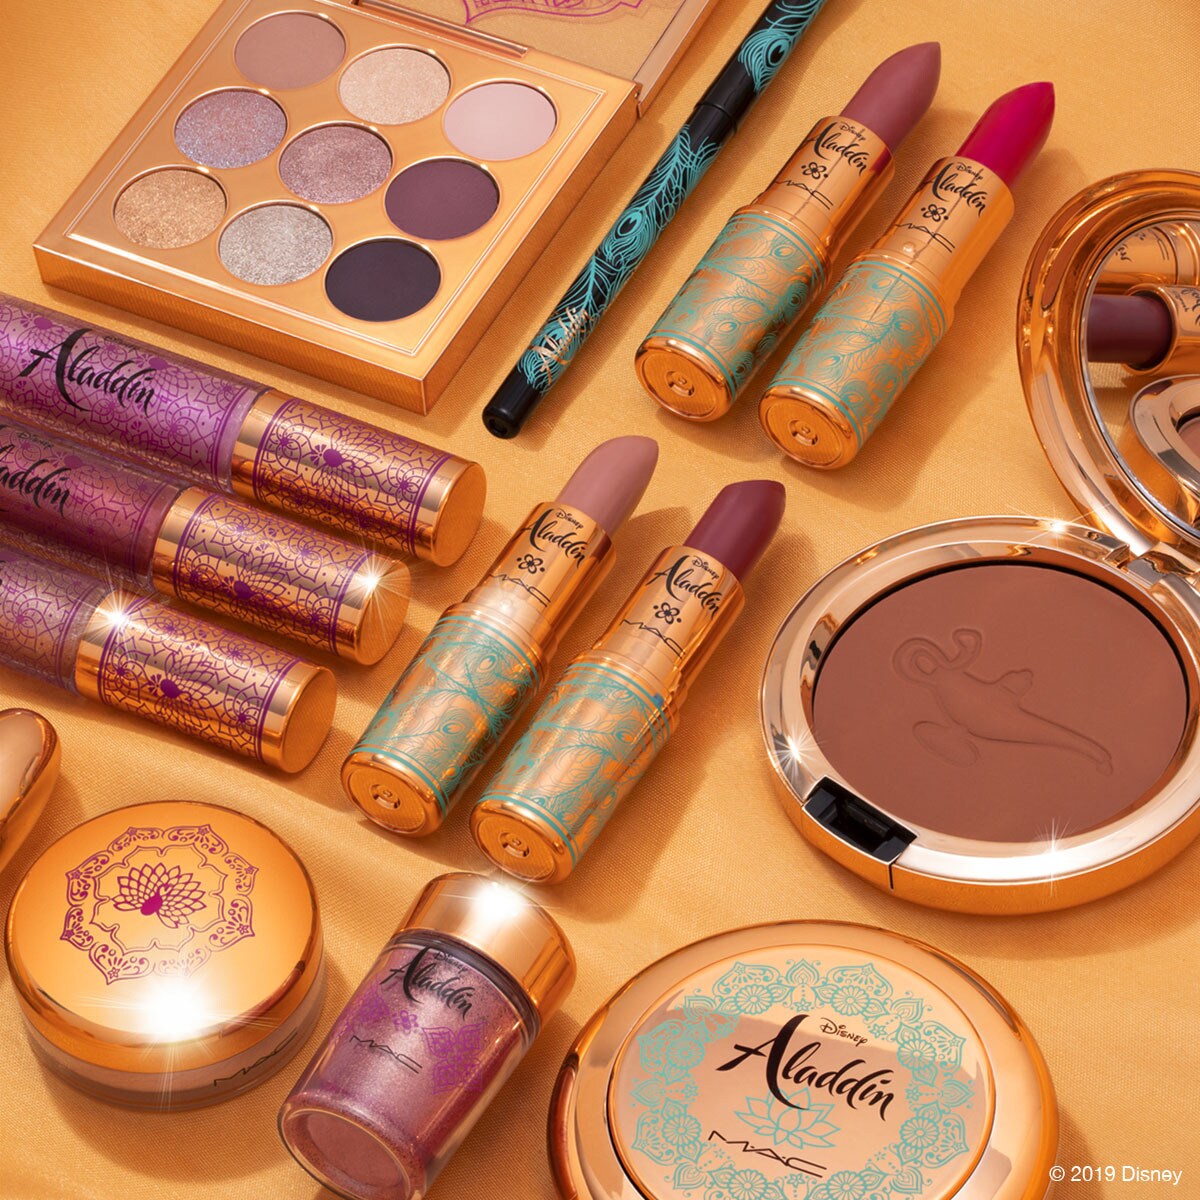 Makeup products from the Aladdin Collection by MAC